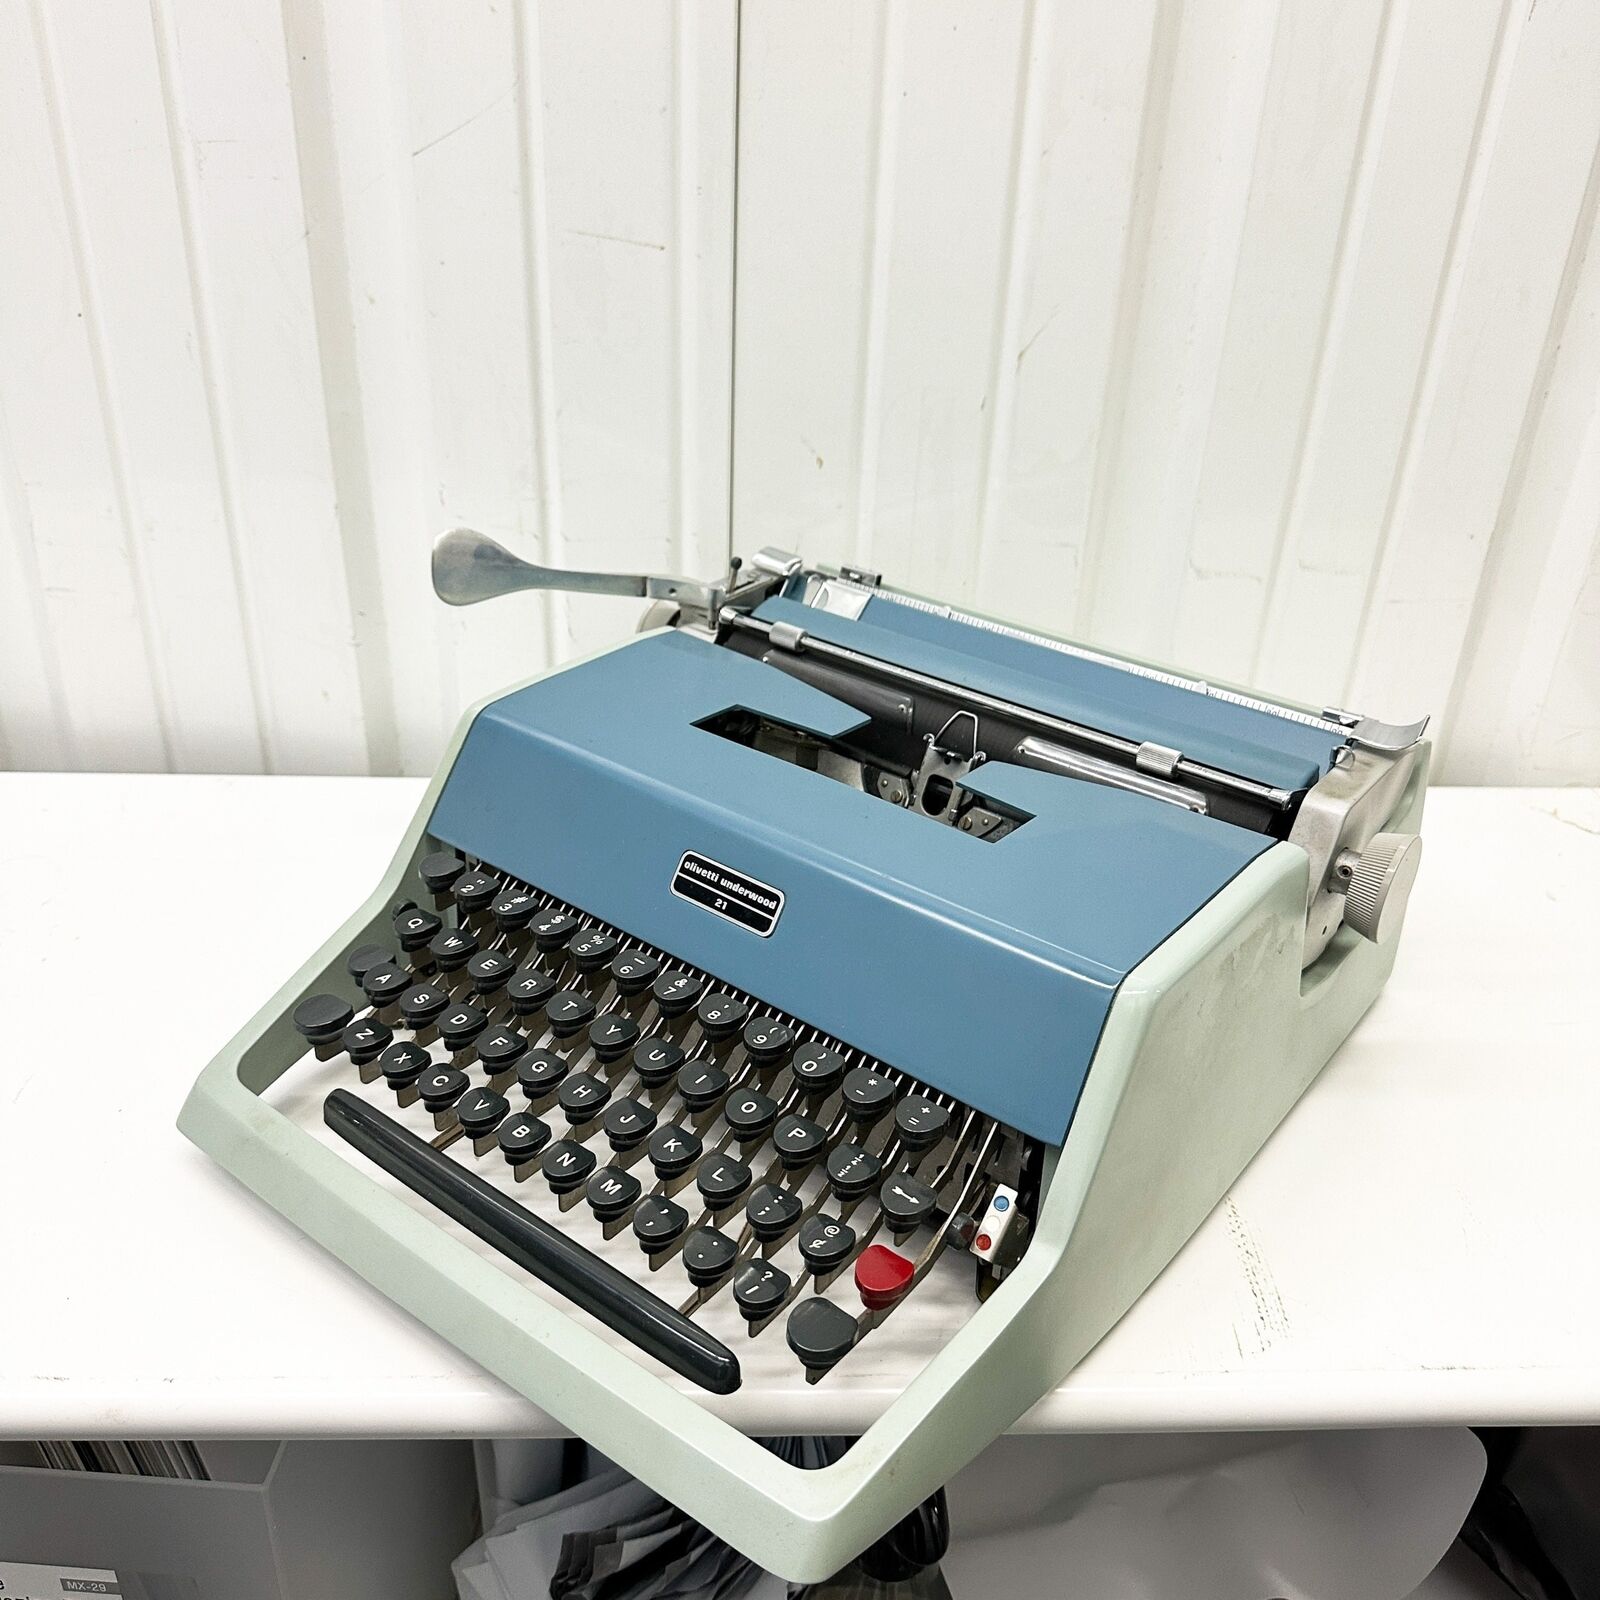 1960s Olivetti Underwood 21 Portable Typewriter in Working Condition With Case